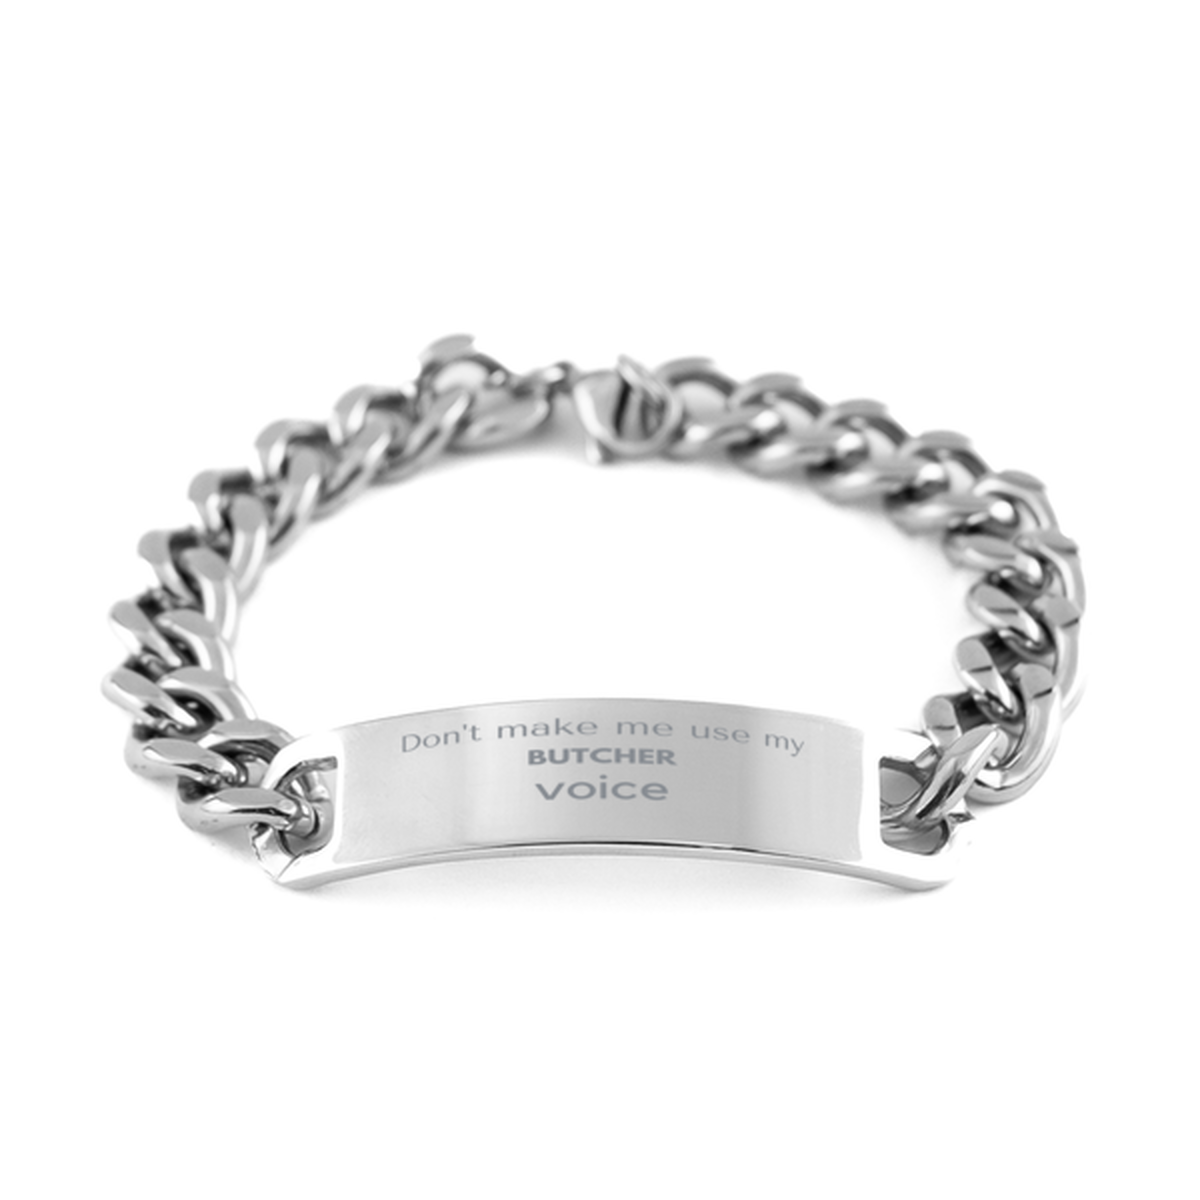 Don't make me use my Butcher voice, Sarcasm Butcher Gifts, Christmas Butcher Cuban Chain Stainless Steel Bracelet Birthday Unique Gifts For Butcher Coworkers, Men, Women, Colleague, Friends